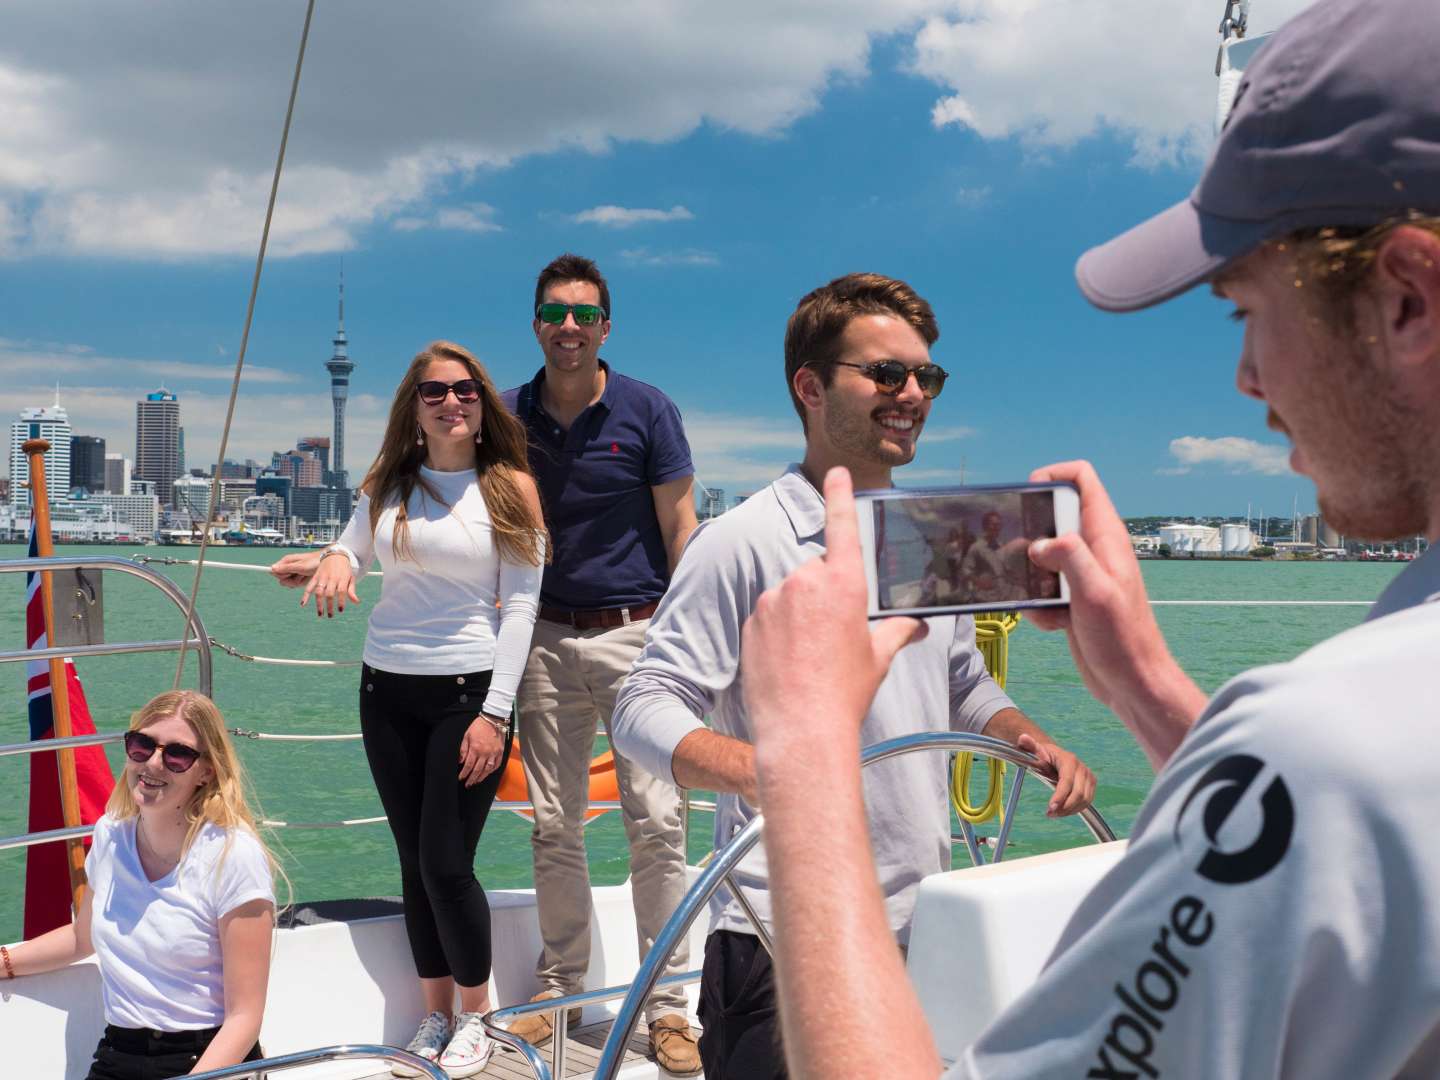 Auckland Harbour Sightseeing and Dinner Cruise. Hauraki Gulf great photo opportunity